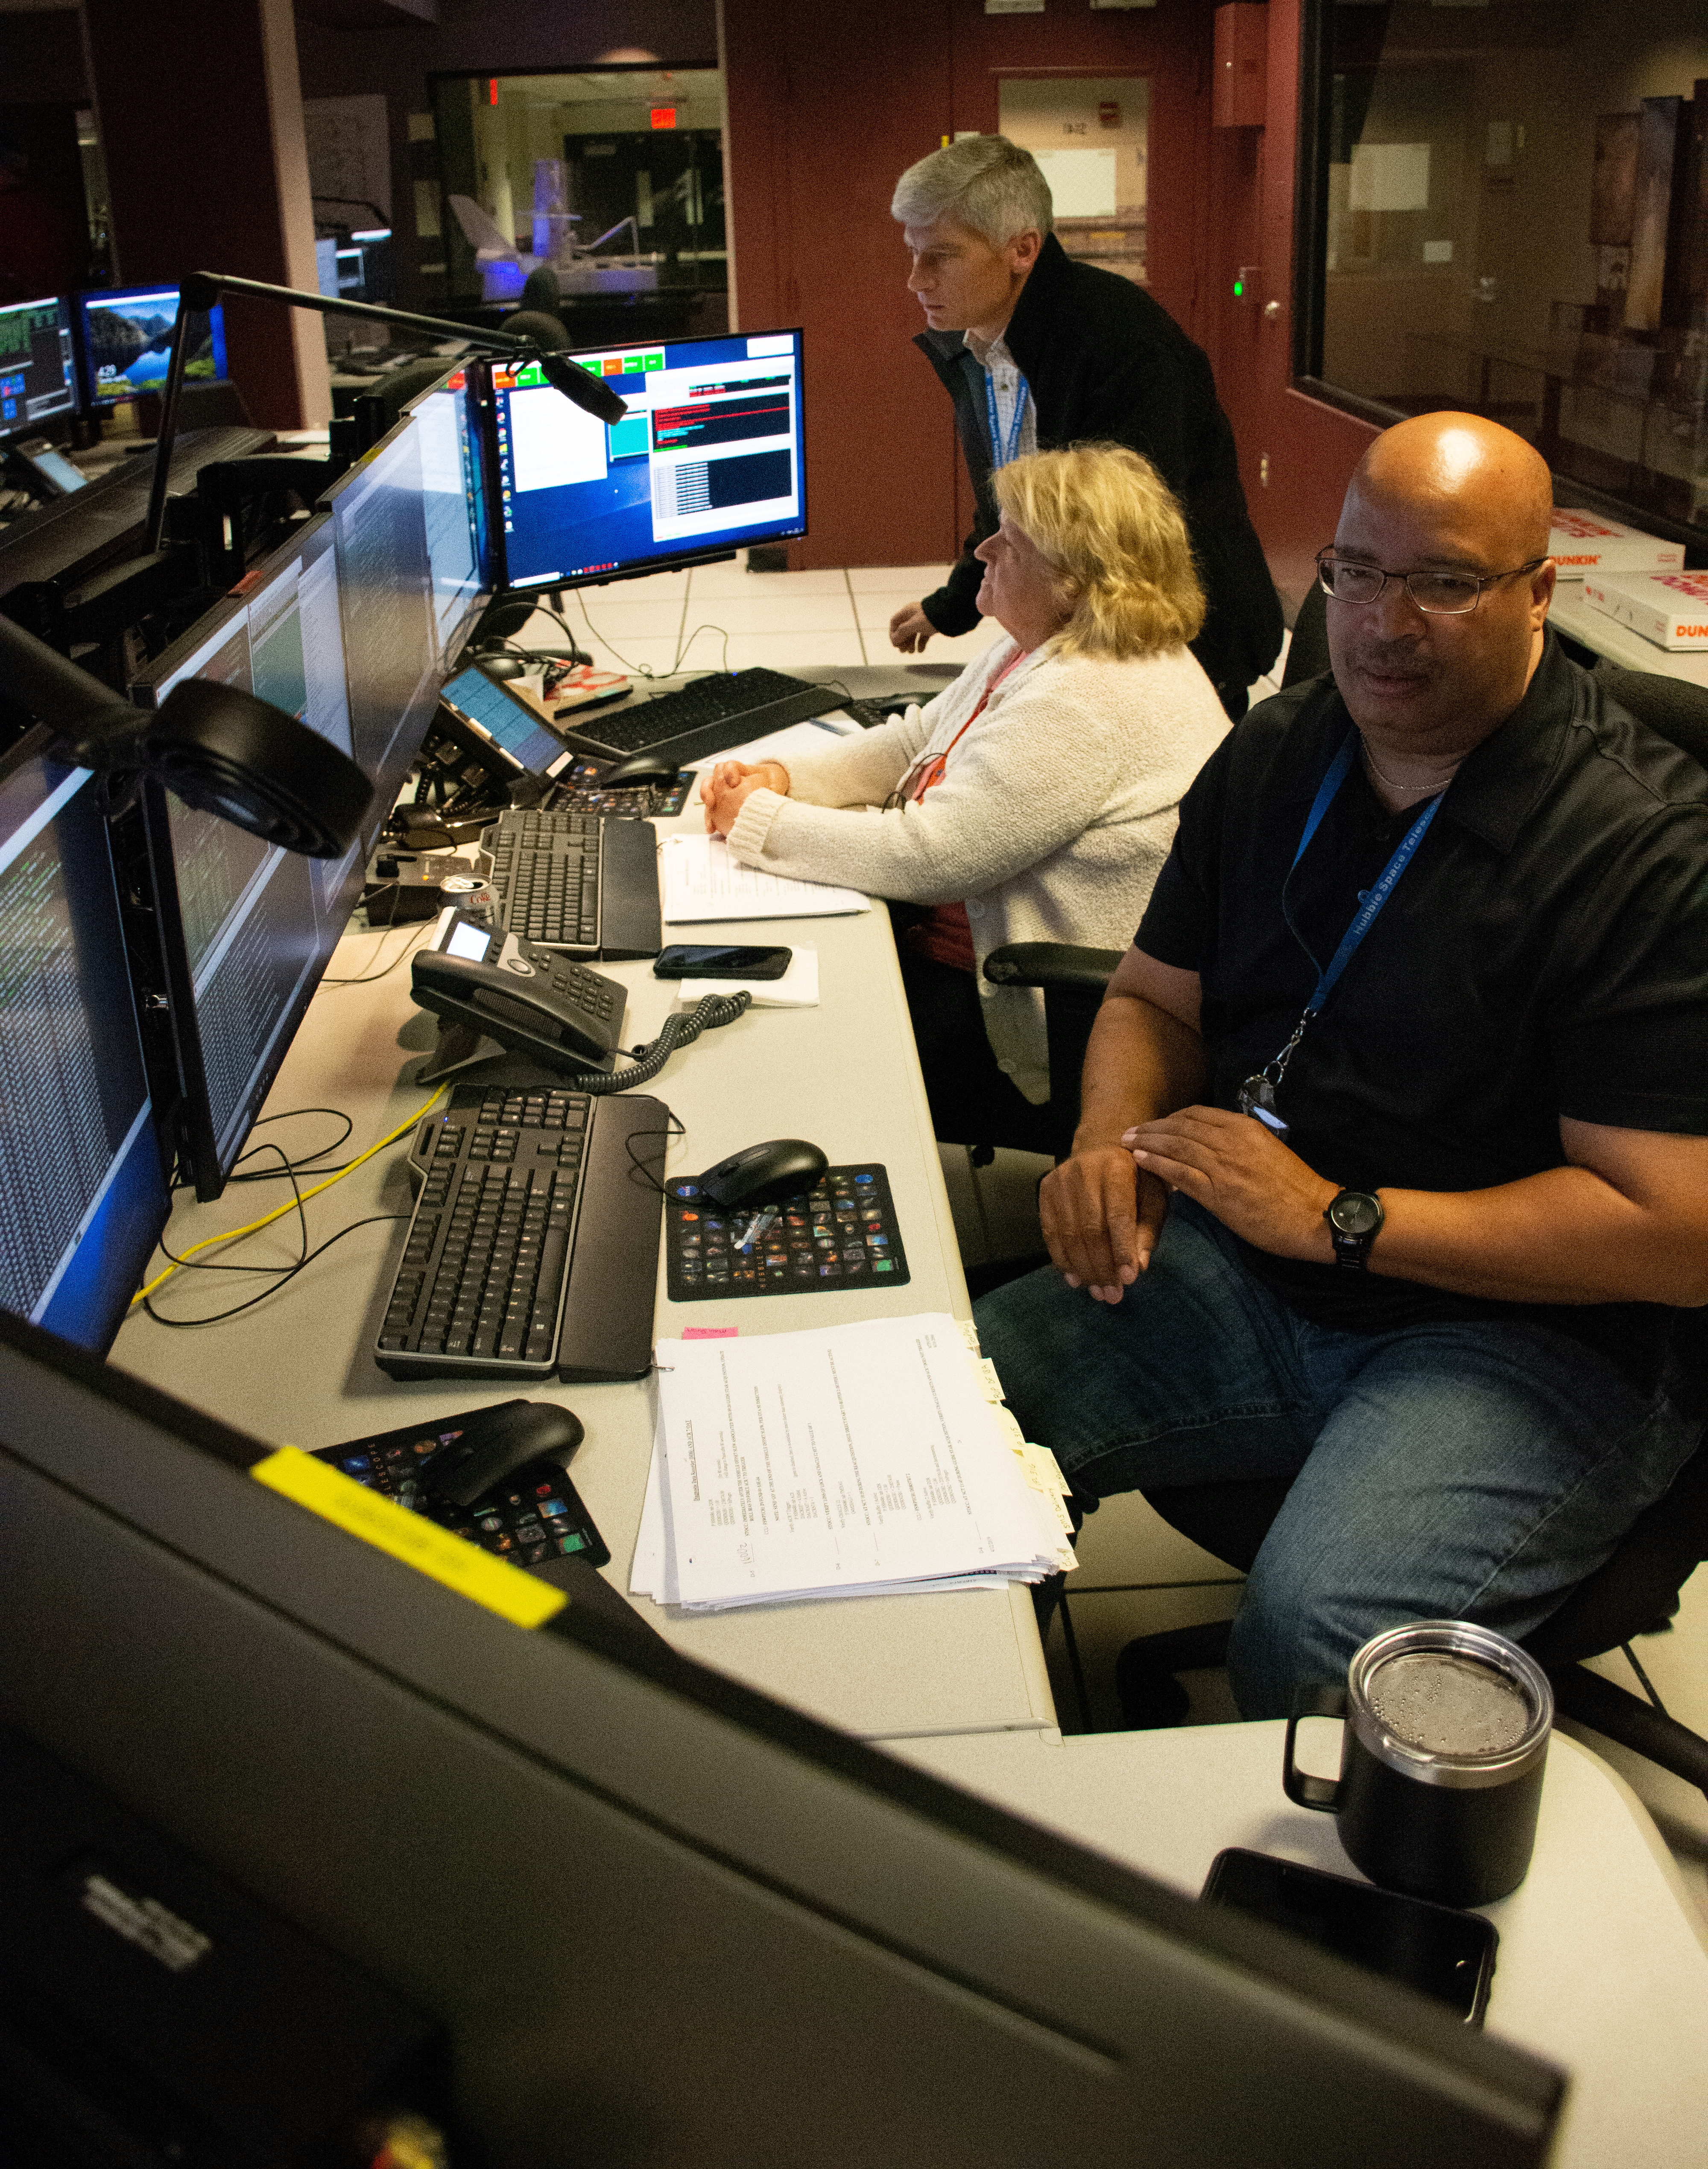 Two people sitting and one standing while monitoring a spacecraft procedure test in the operations area of Hubble.